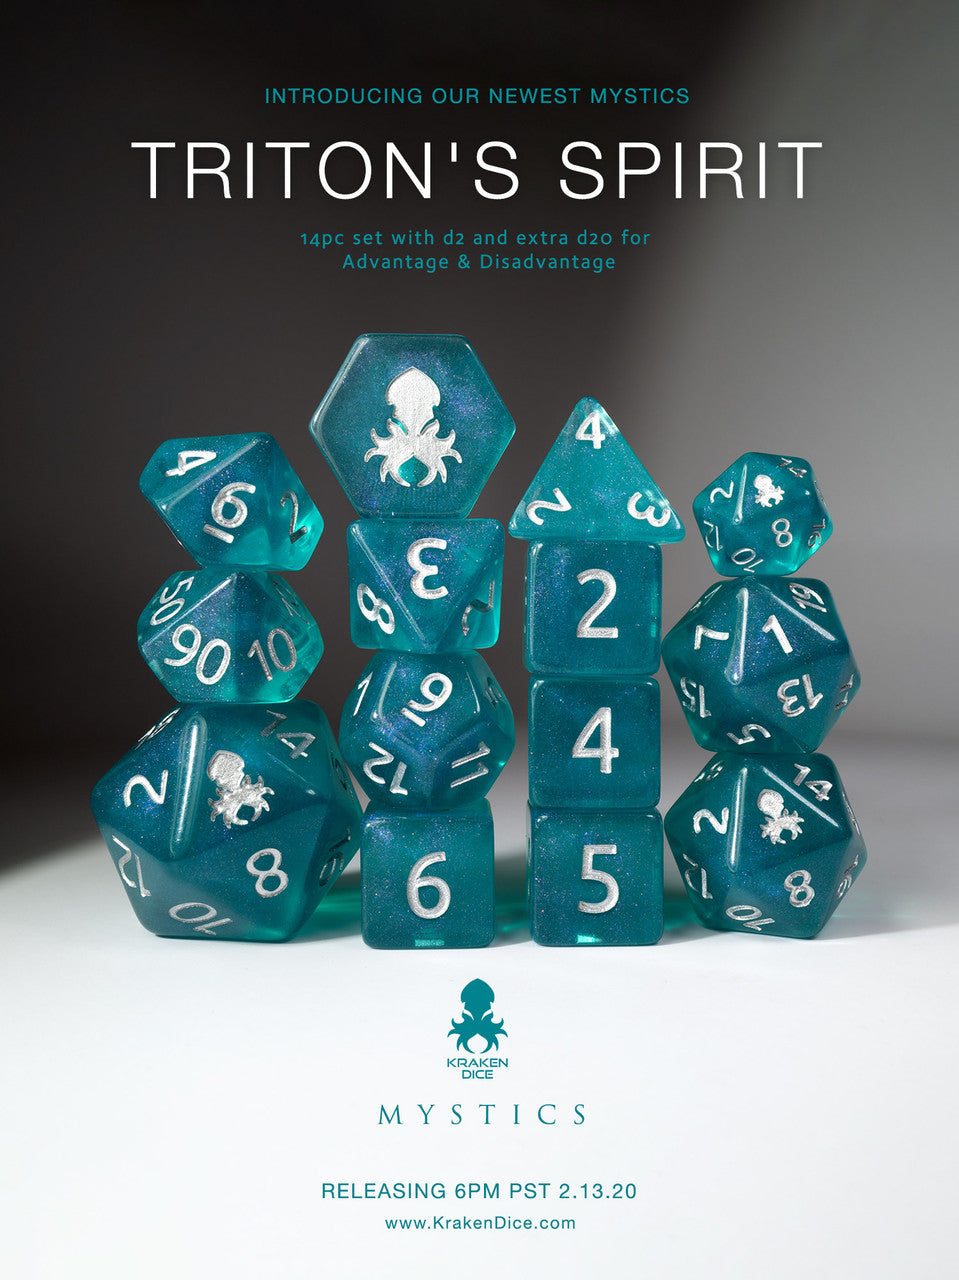 Triton's Spirit 14pc Polyhedral Dice set with Silver Ink